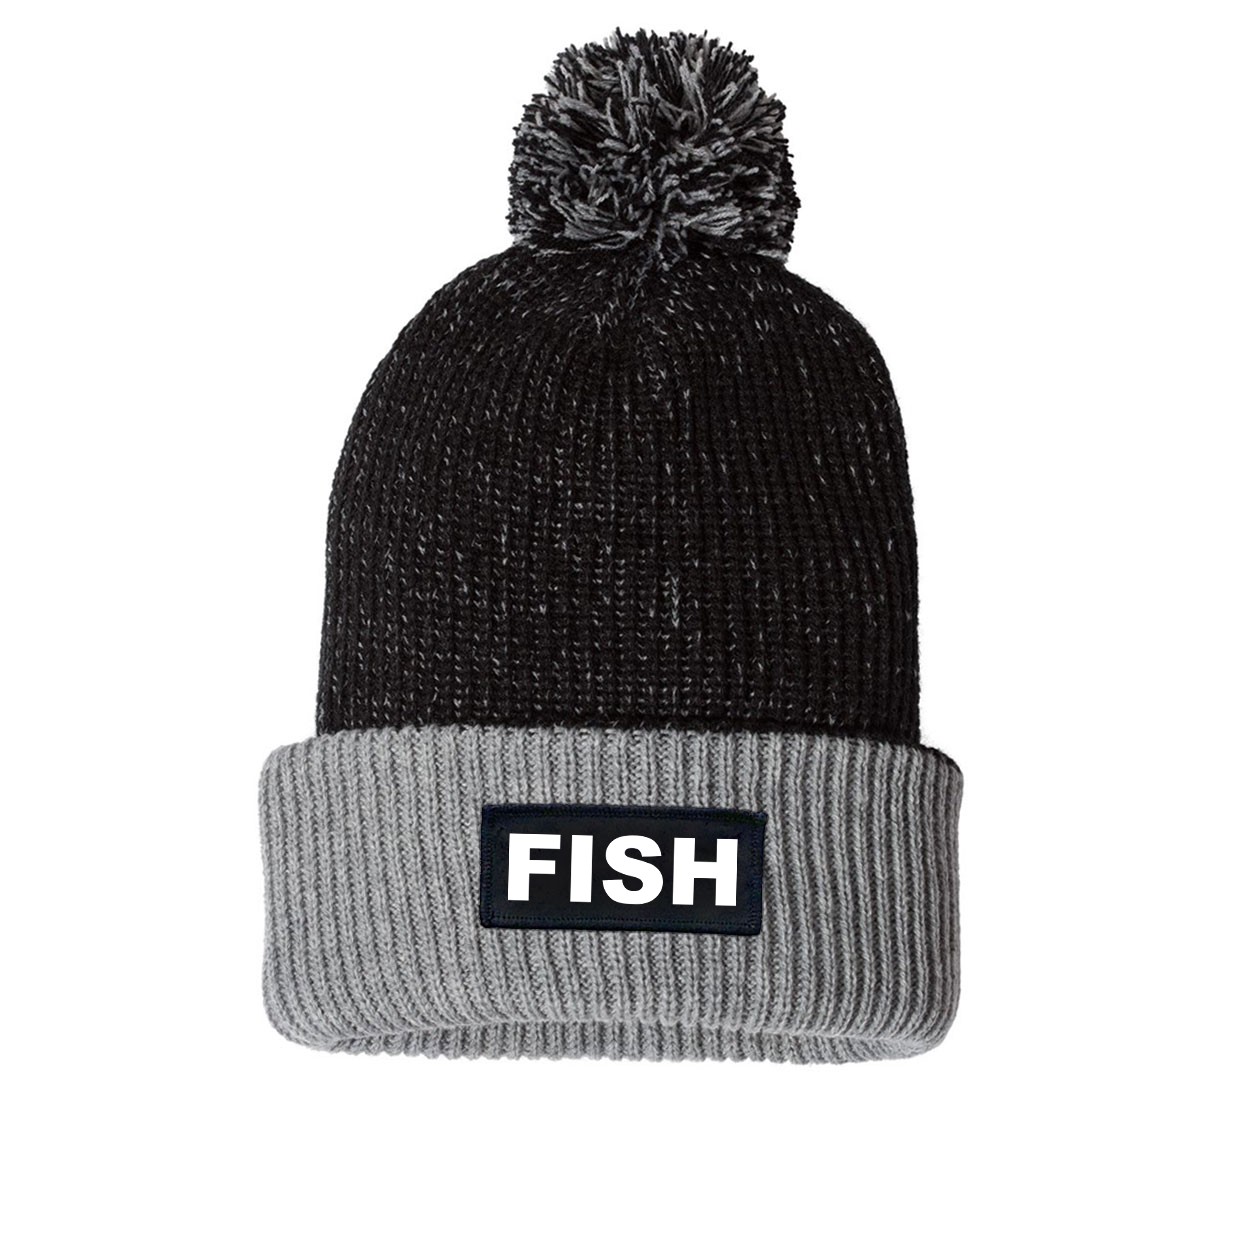 Fish Brand Logo Night Out Woven Patch Roll Up Pom Knit Beanie Black/Gray (White Logo)